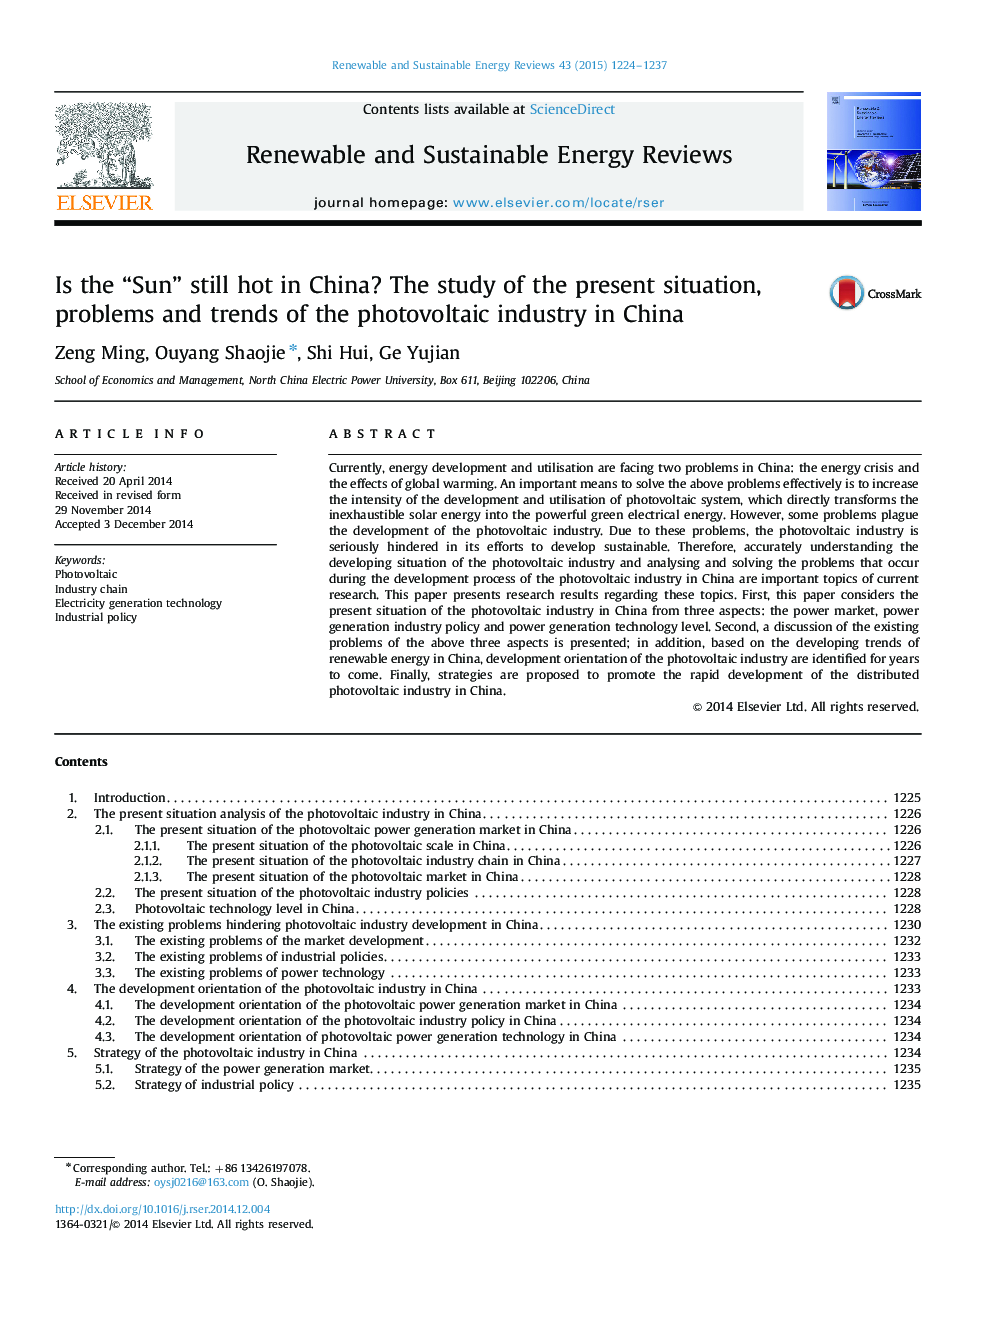 Is the “Sun” still hot in China? The study of the present situation, problems and trends of the photovoltaic industry in China